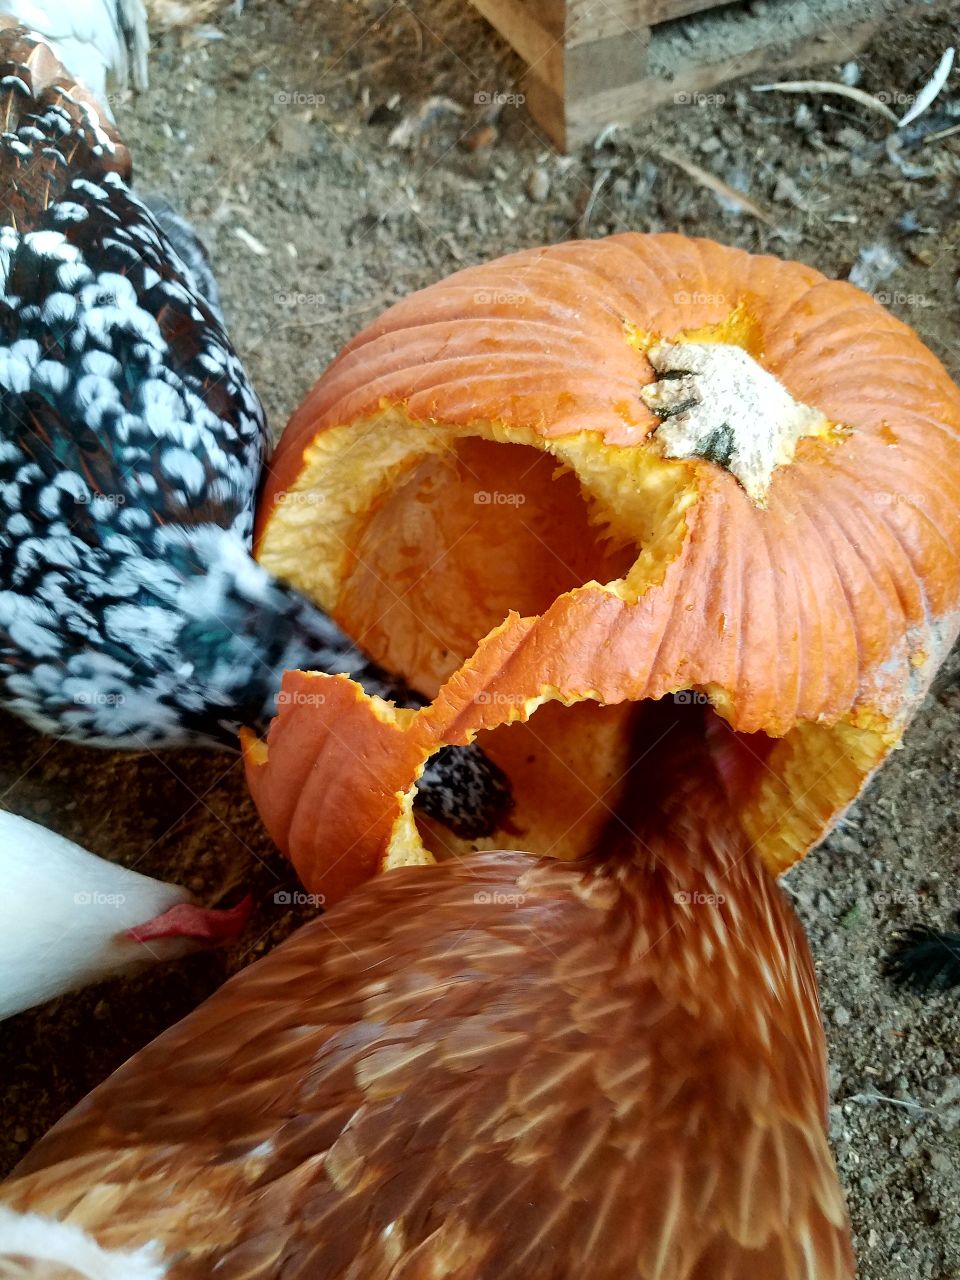 My chickens carved their own pumpkin!